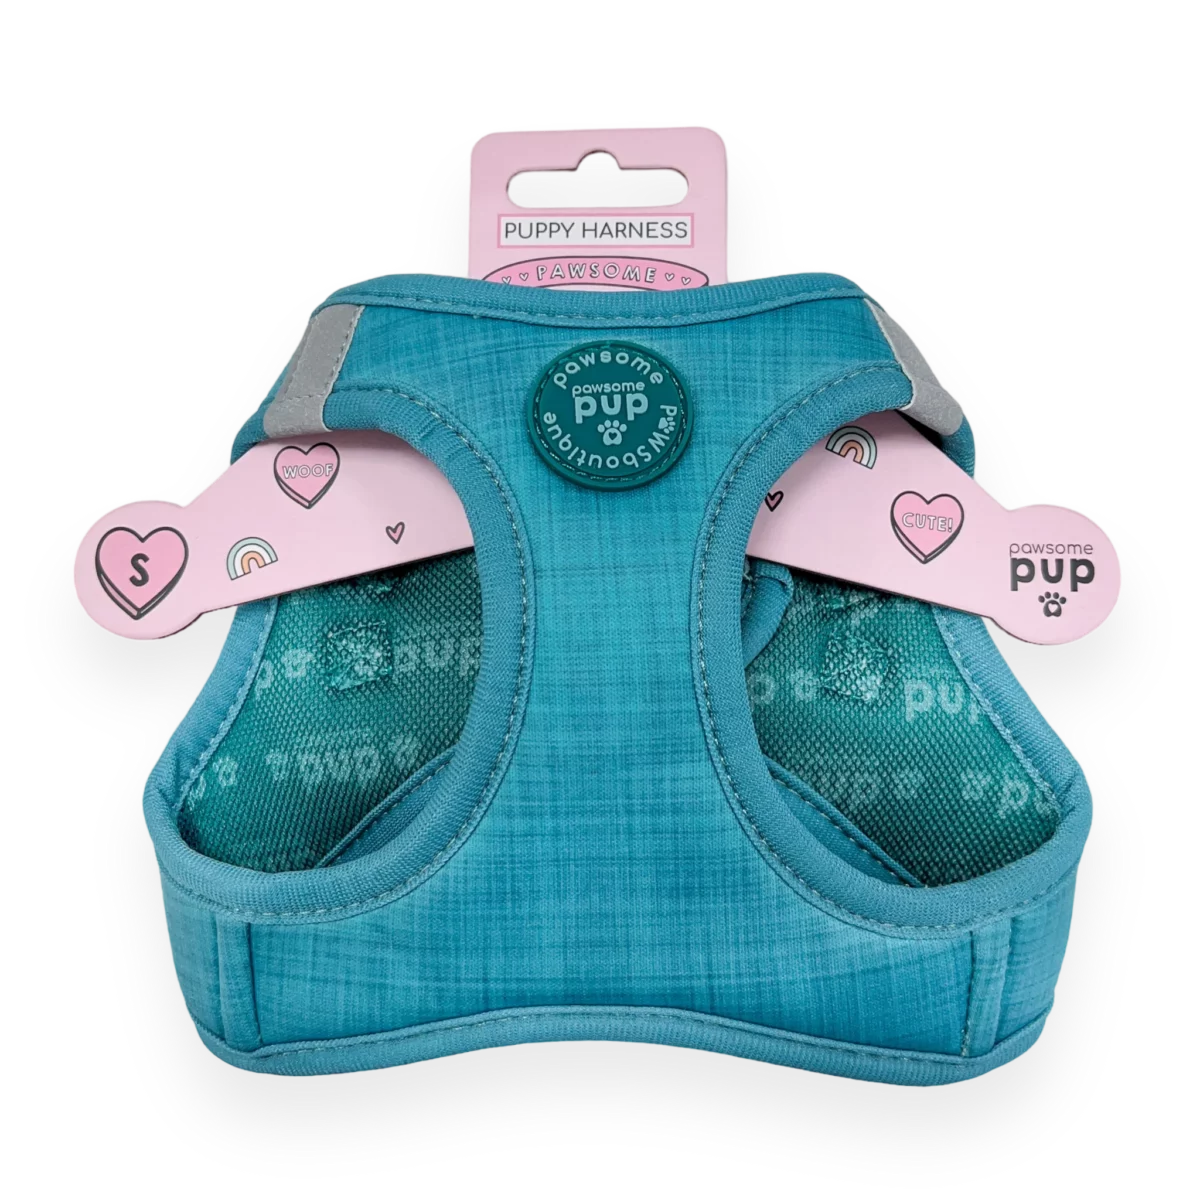 Pawsome Pup Harness - Teal from Catdog Store